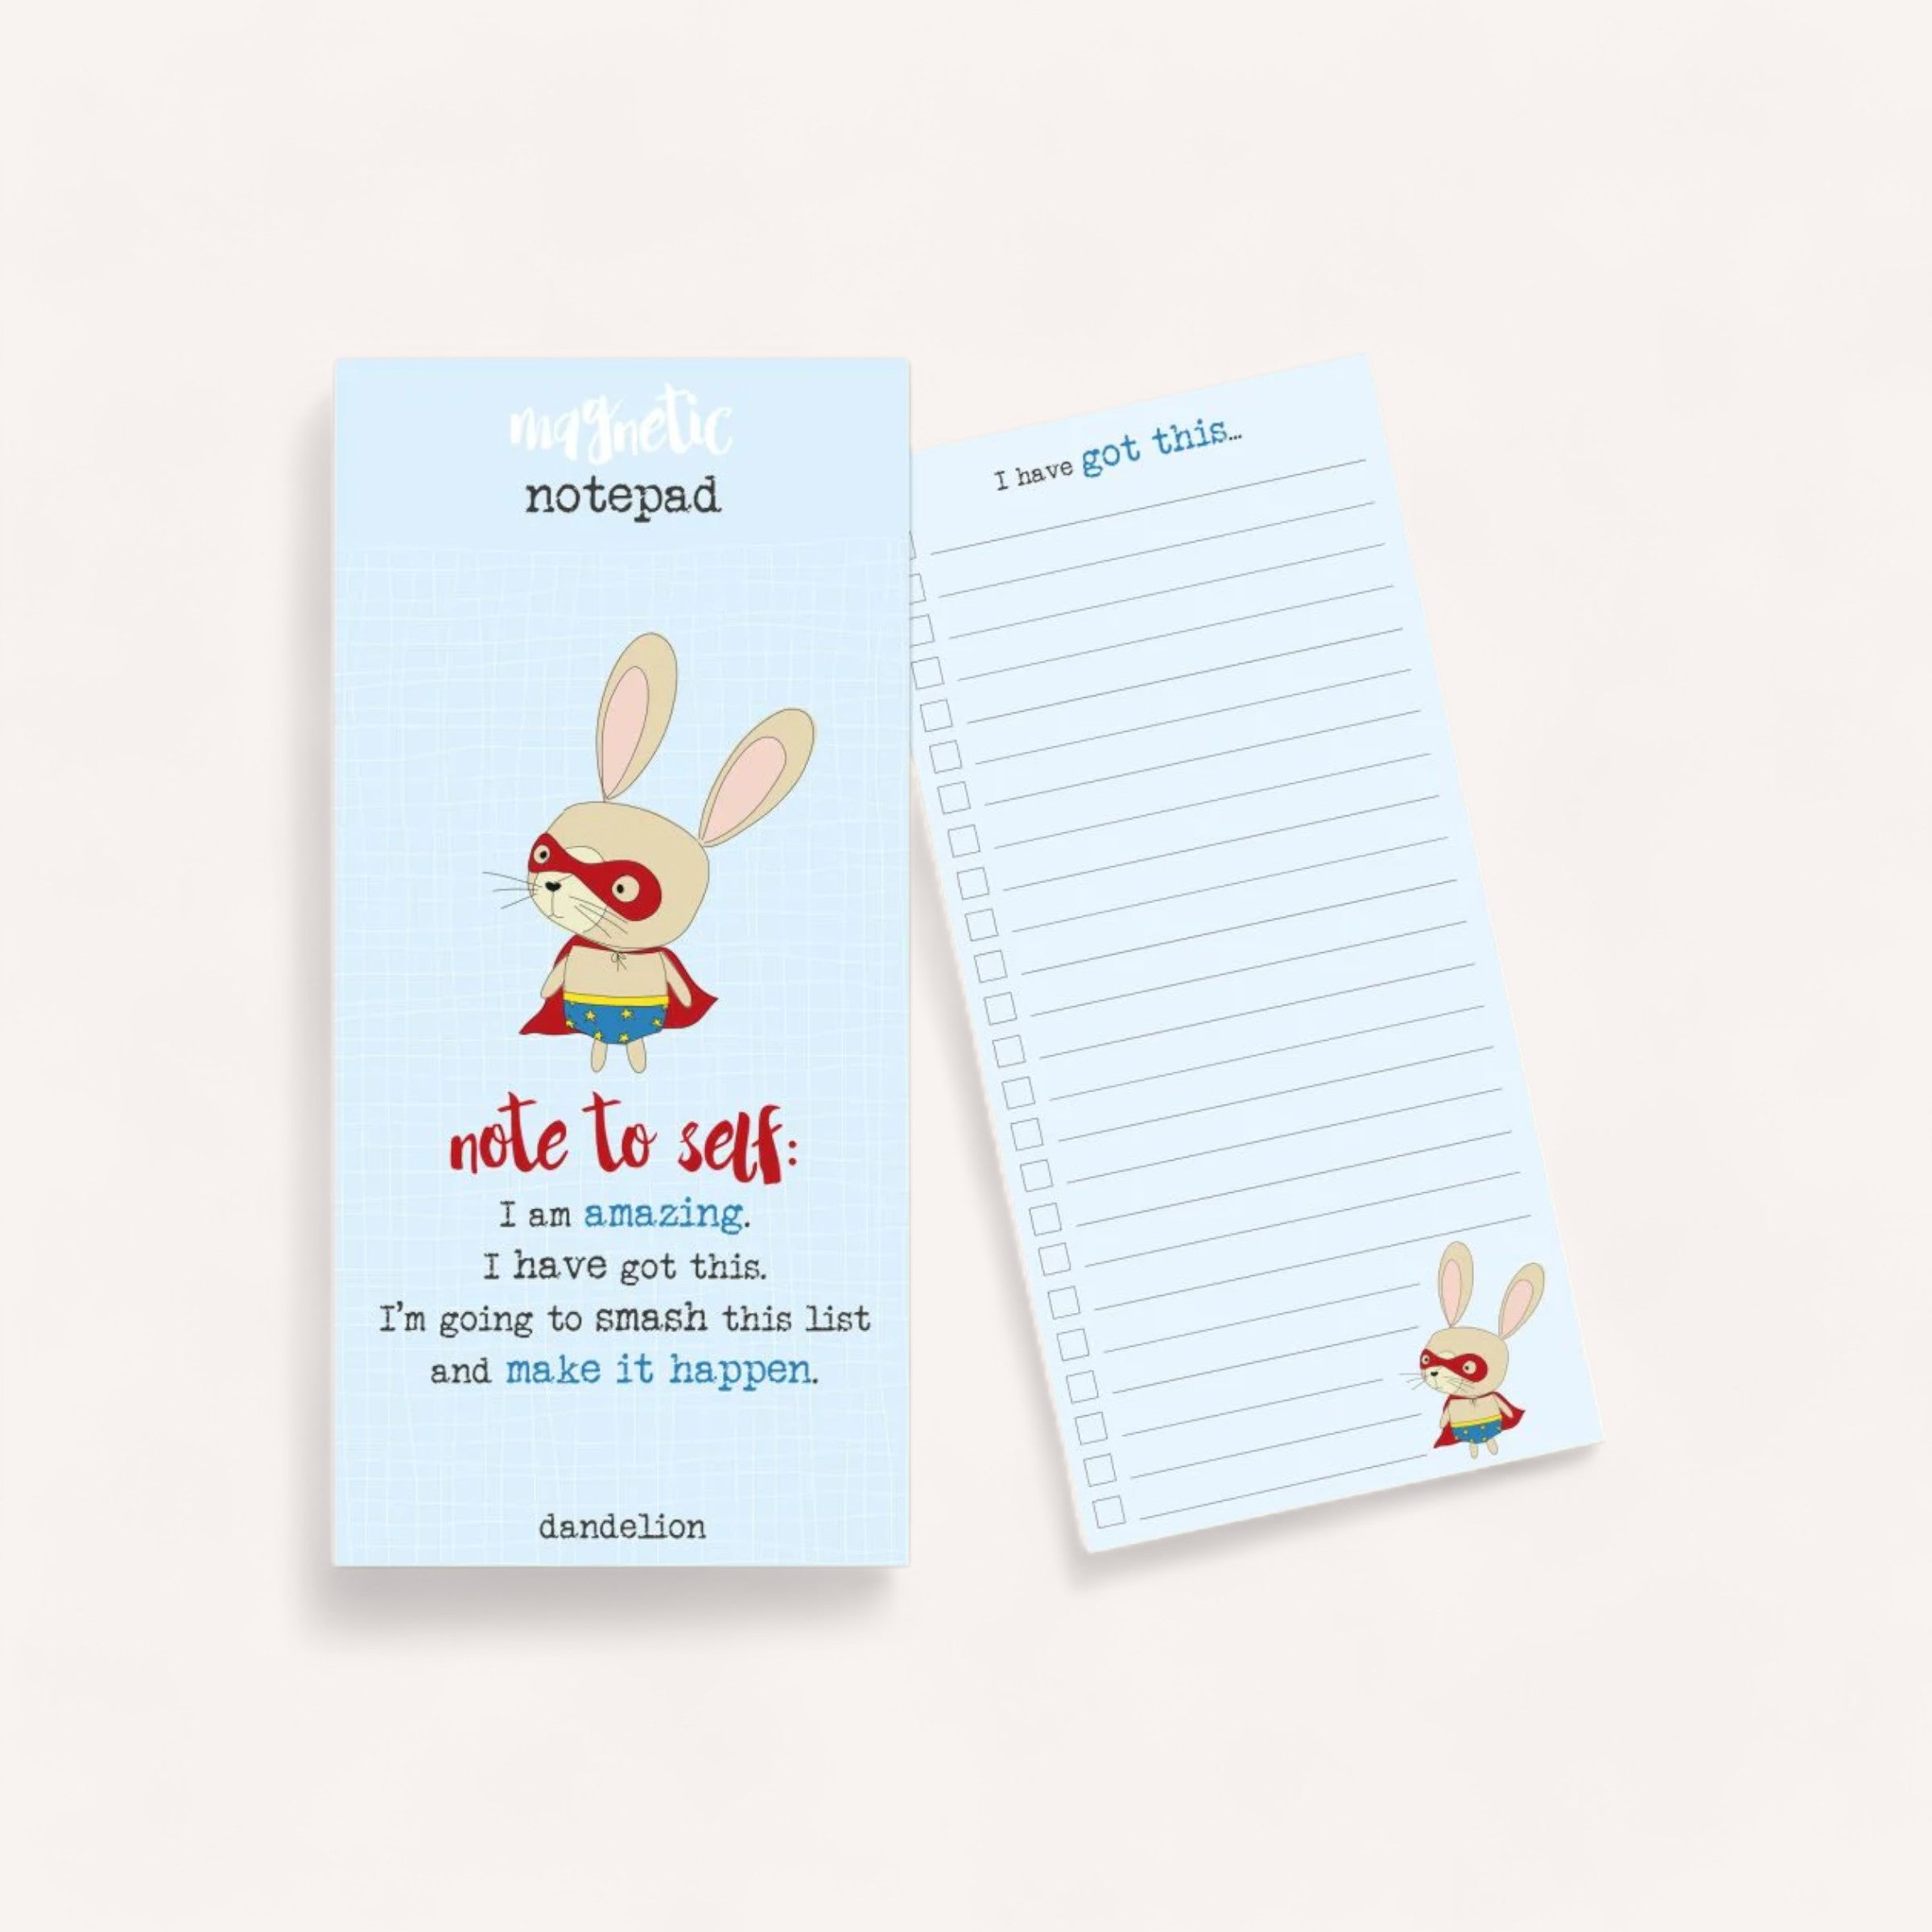 Two Make It Happen Magnetic Notepads with a blue cover featuring a cartoon rabbit and motivational text, next to a lined white notepad with the phrase "I have got this.